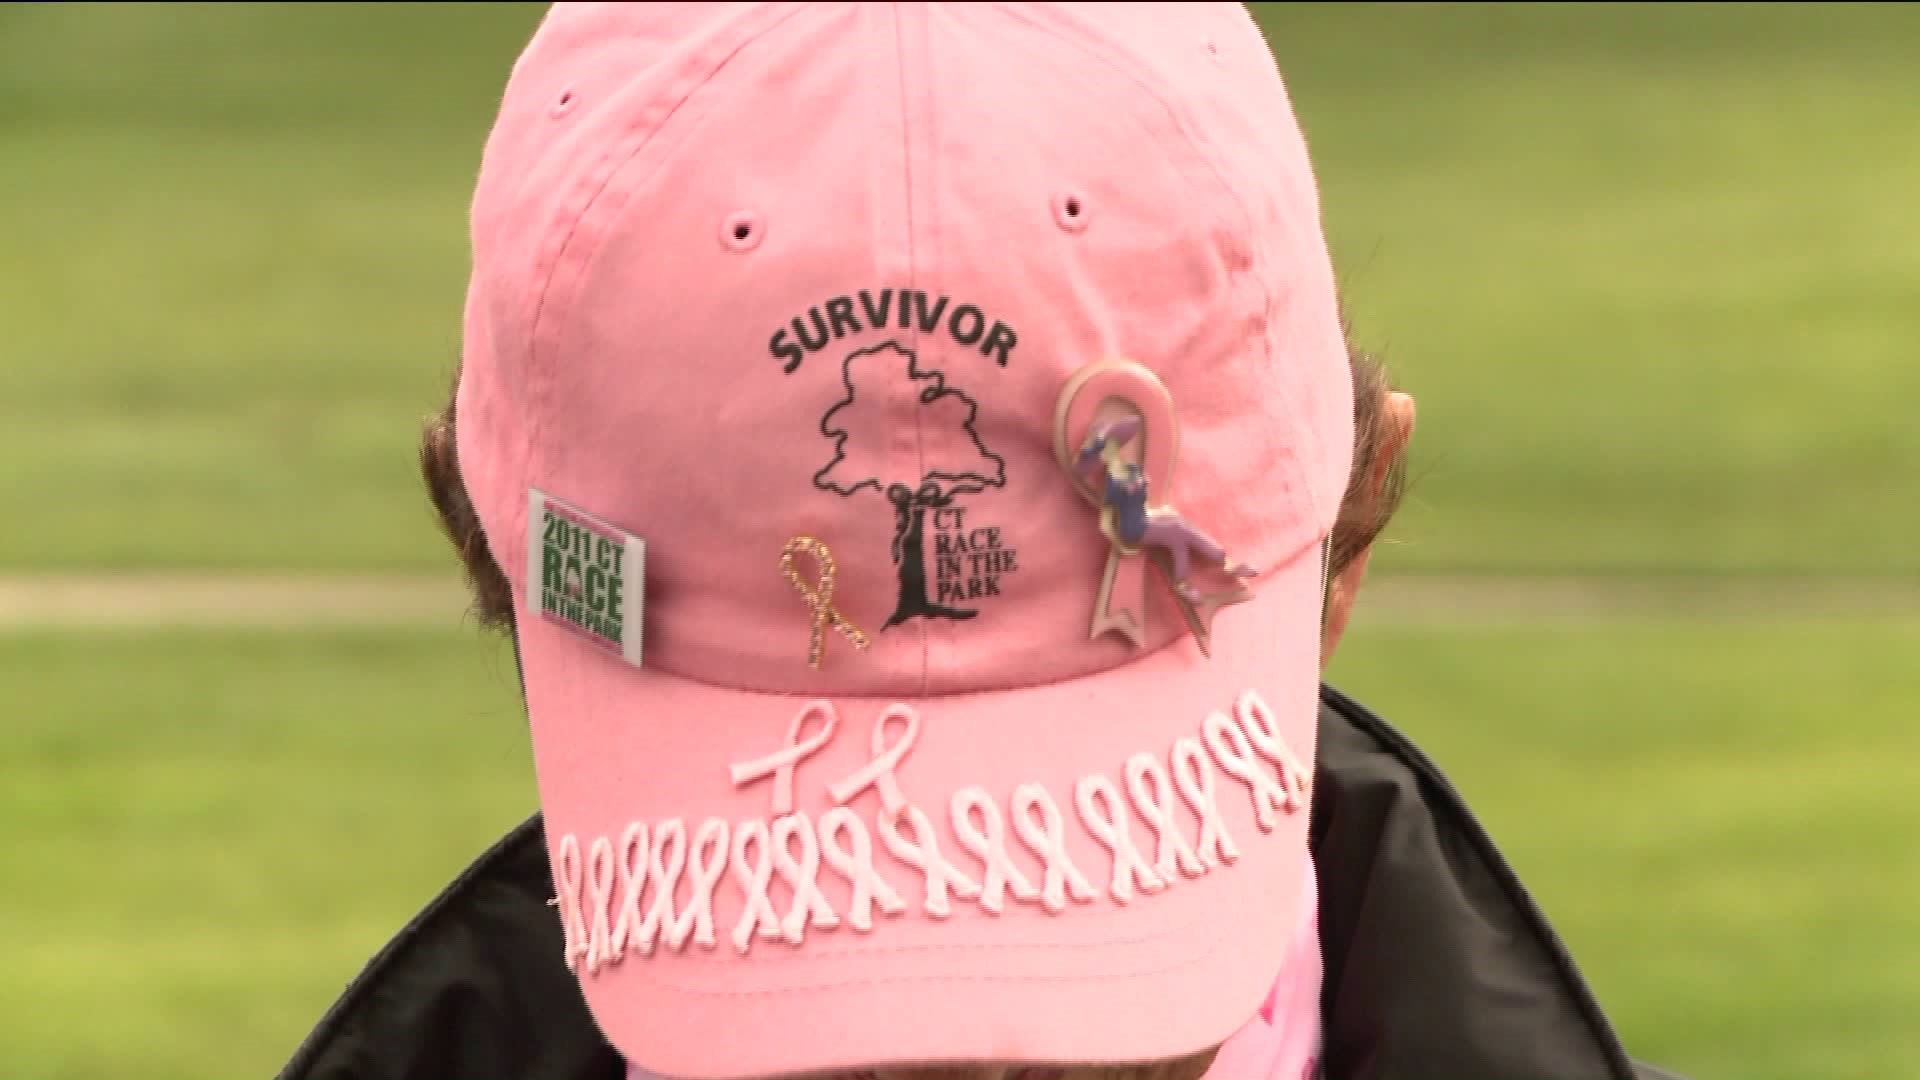 Saturday`s Race in the Park raises money to fight breast cancer in state